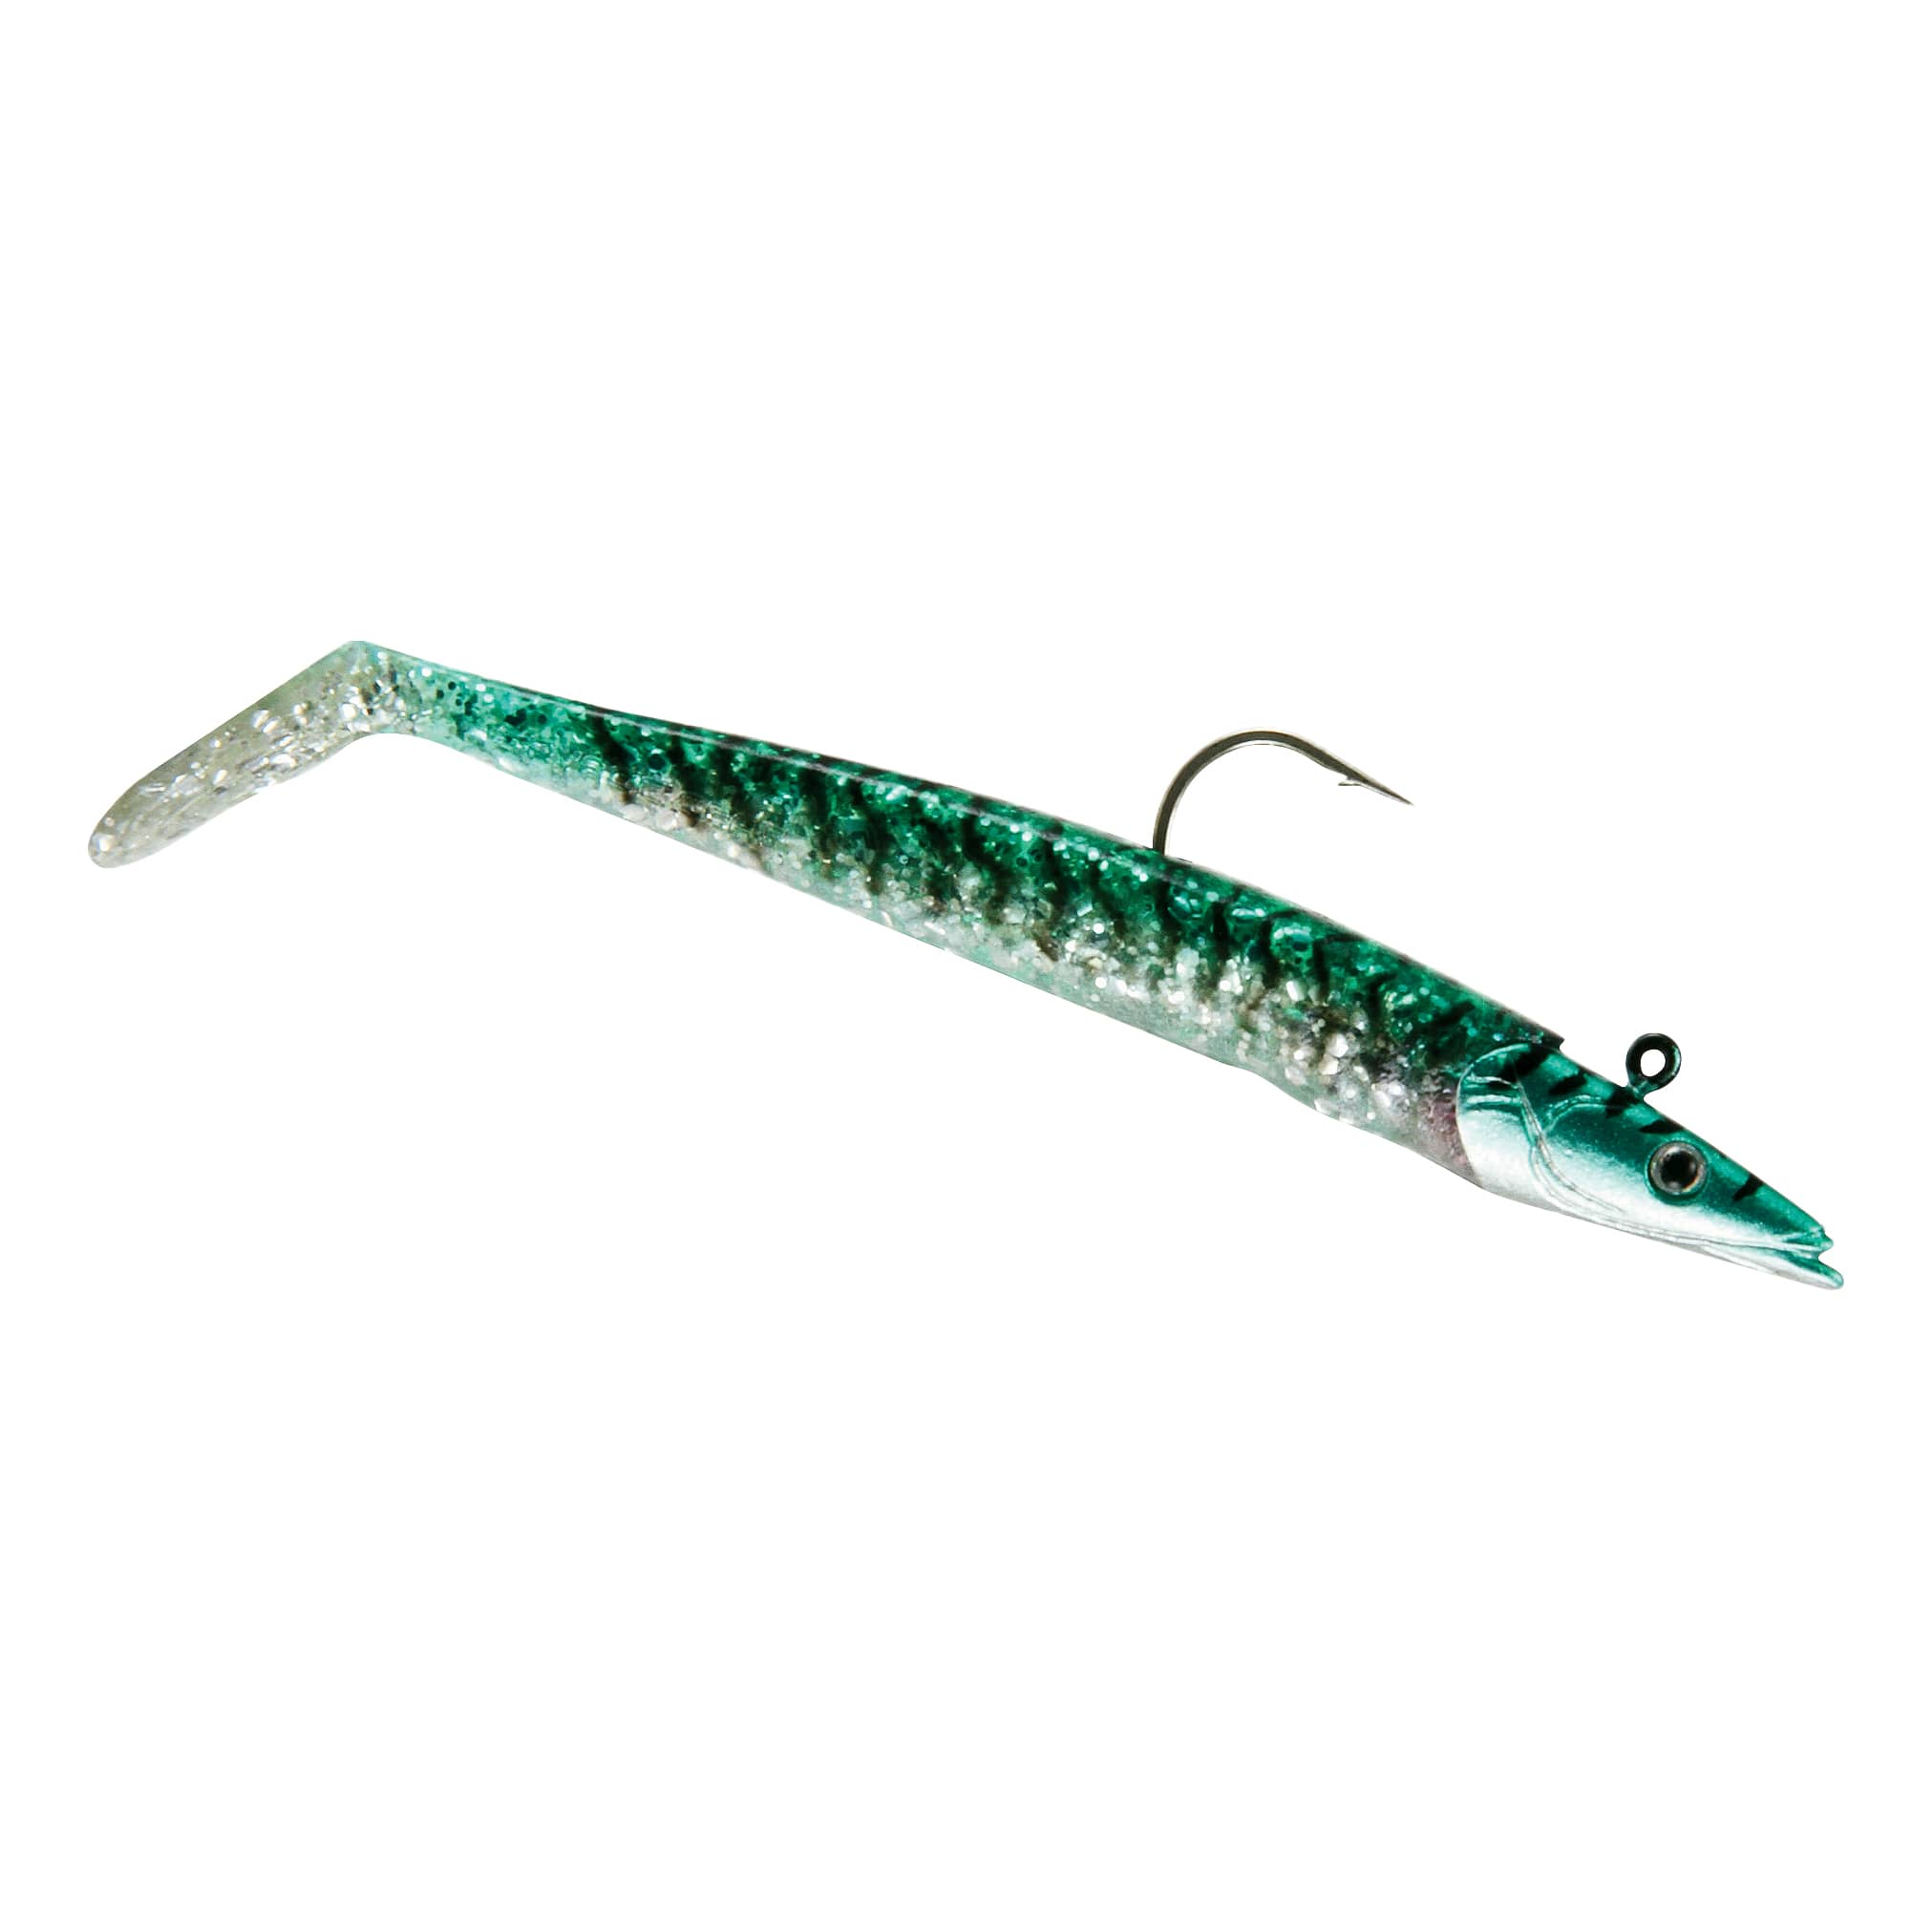 An easy way to add extra weight to your fishing lures. Savage Gear